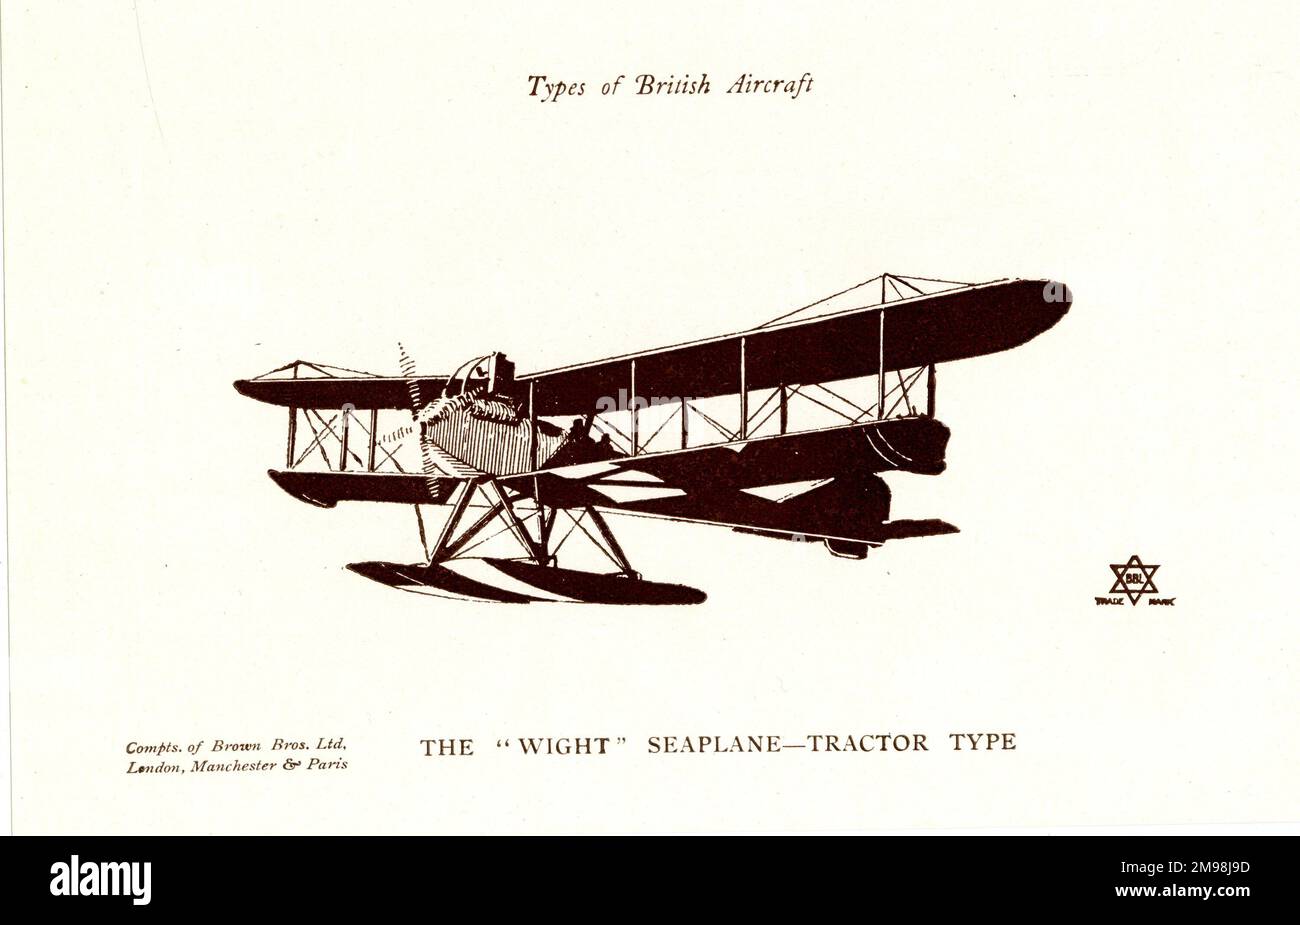 Types of British Aircraft - The Wright Seaplane, tractor type. Stock Photo